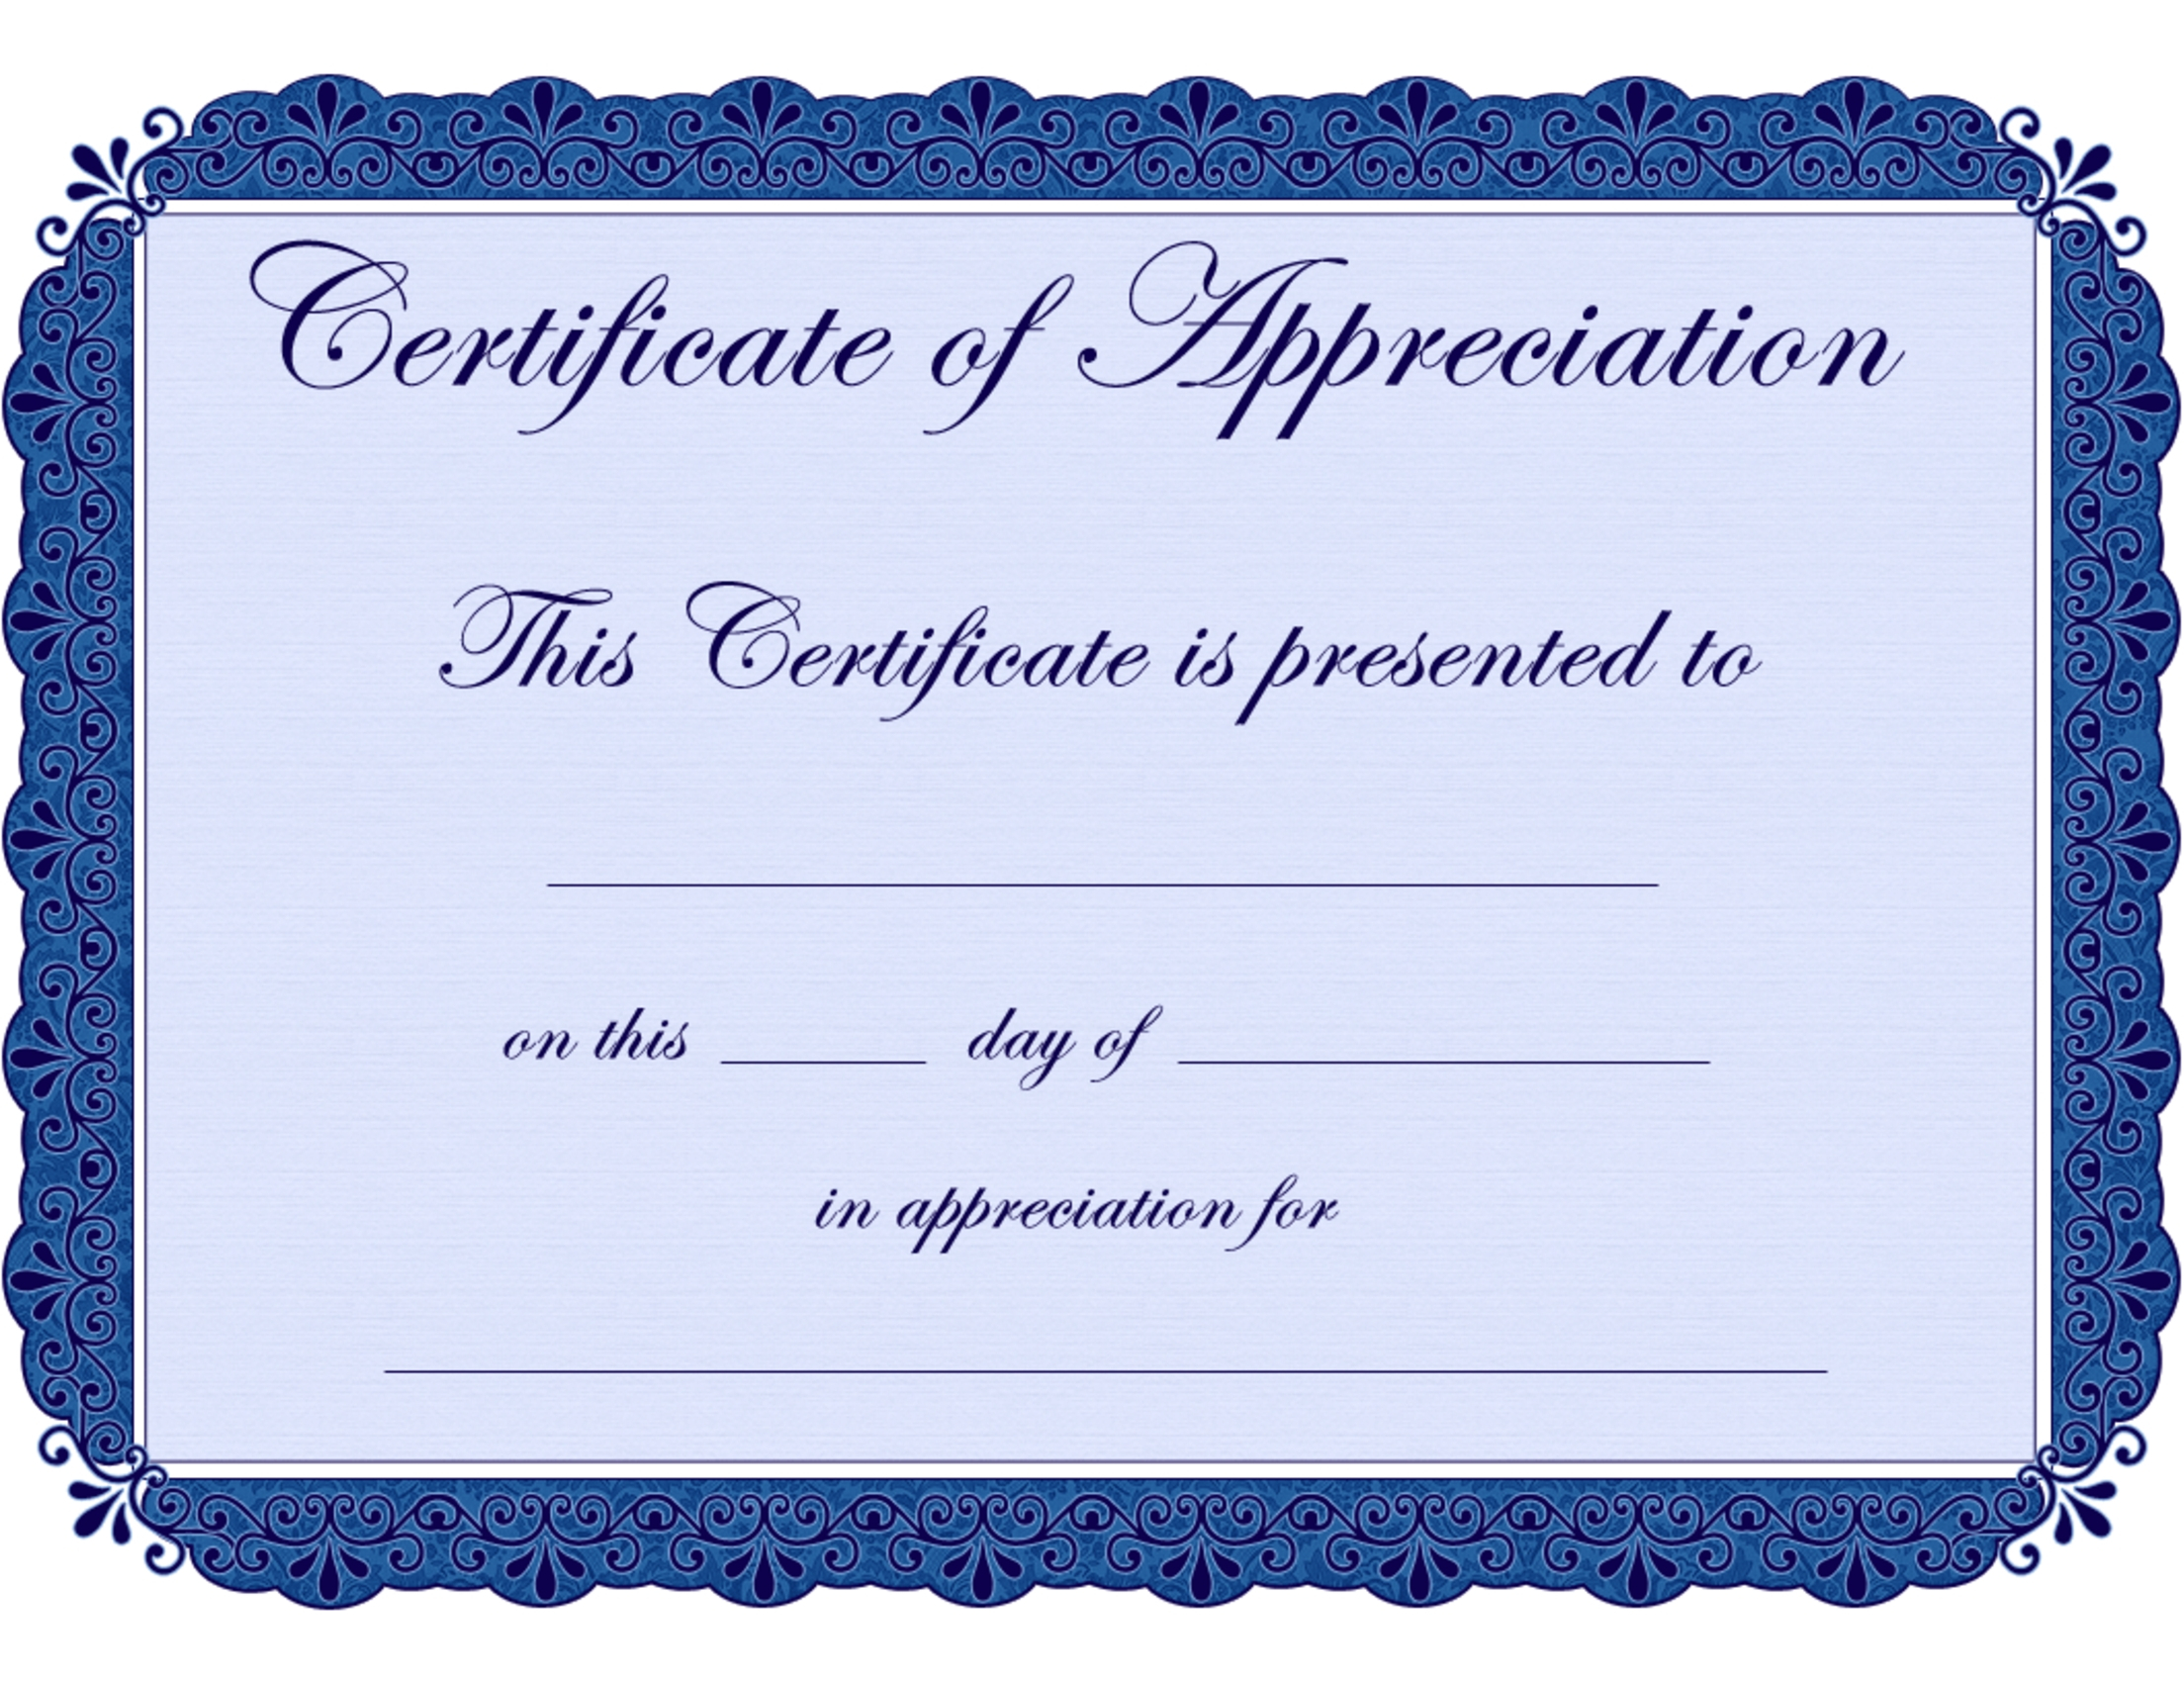 Certificate Template Of Appreciation | Safebest.xyz With Birth Certificate Template For Microsoft Word